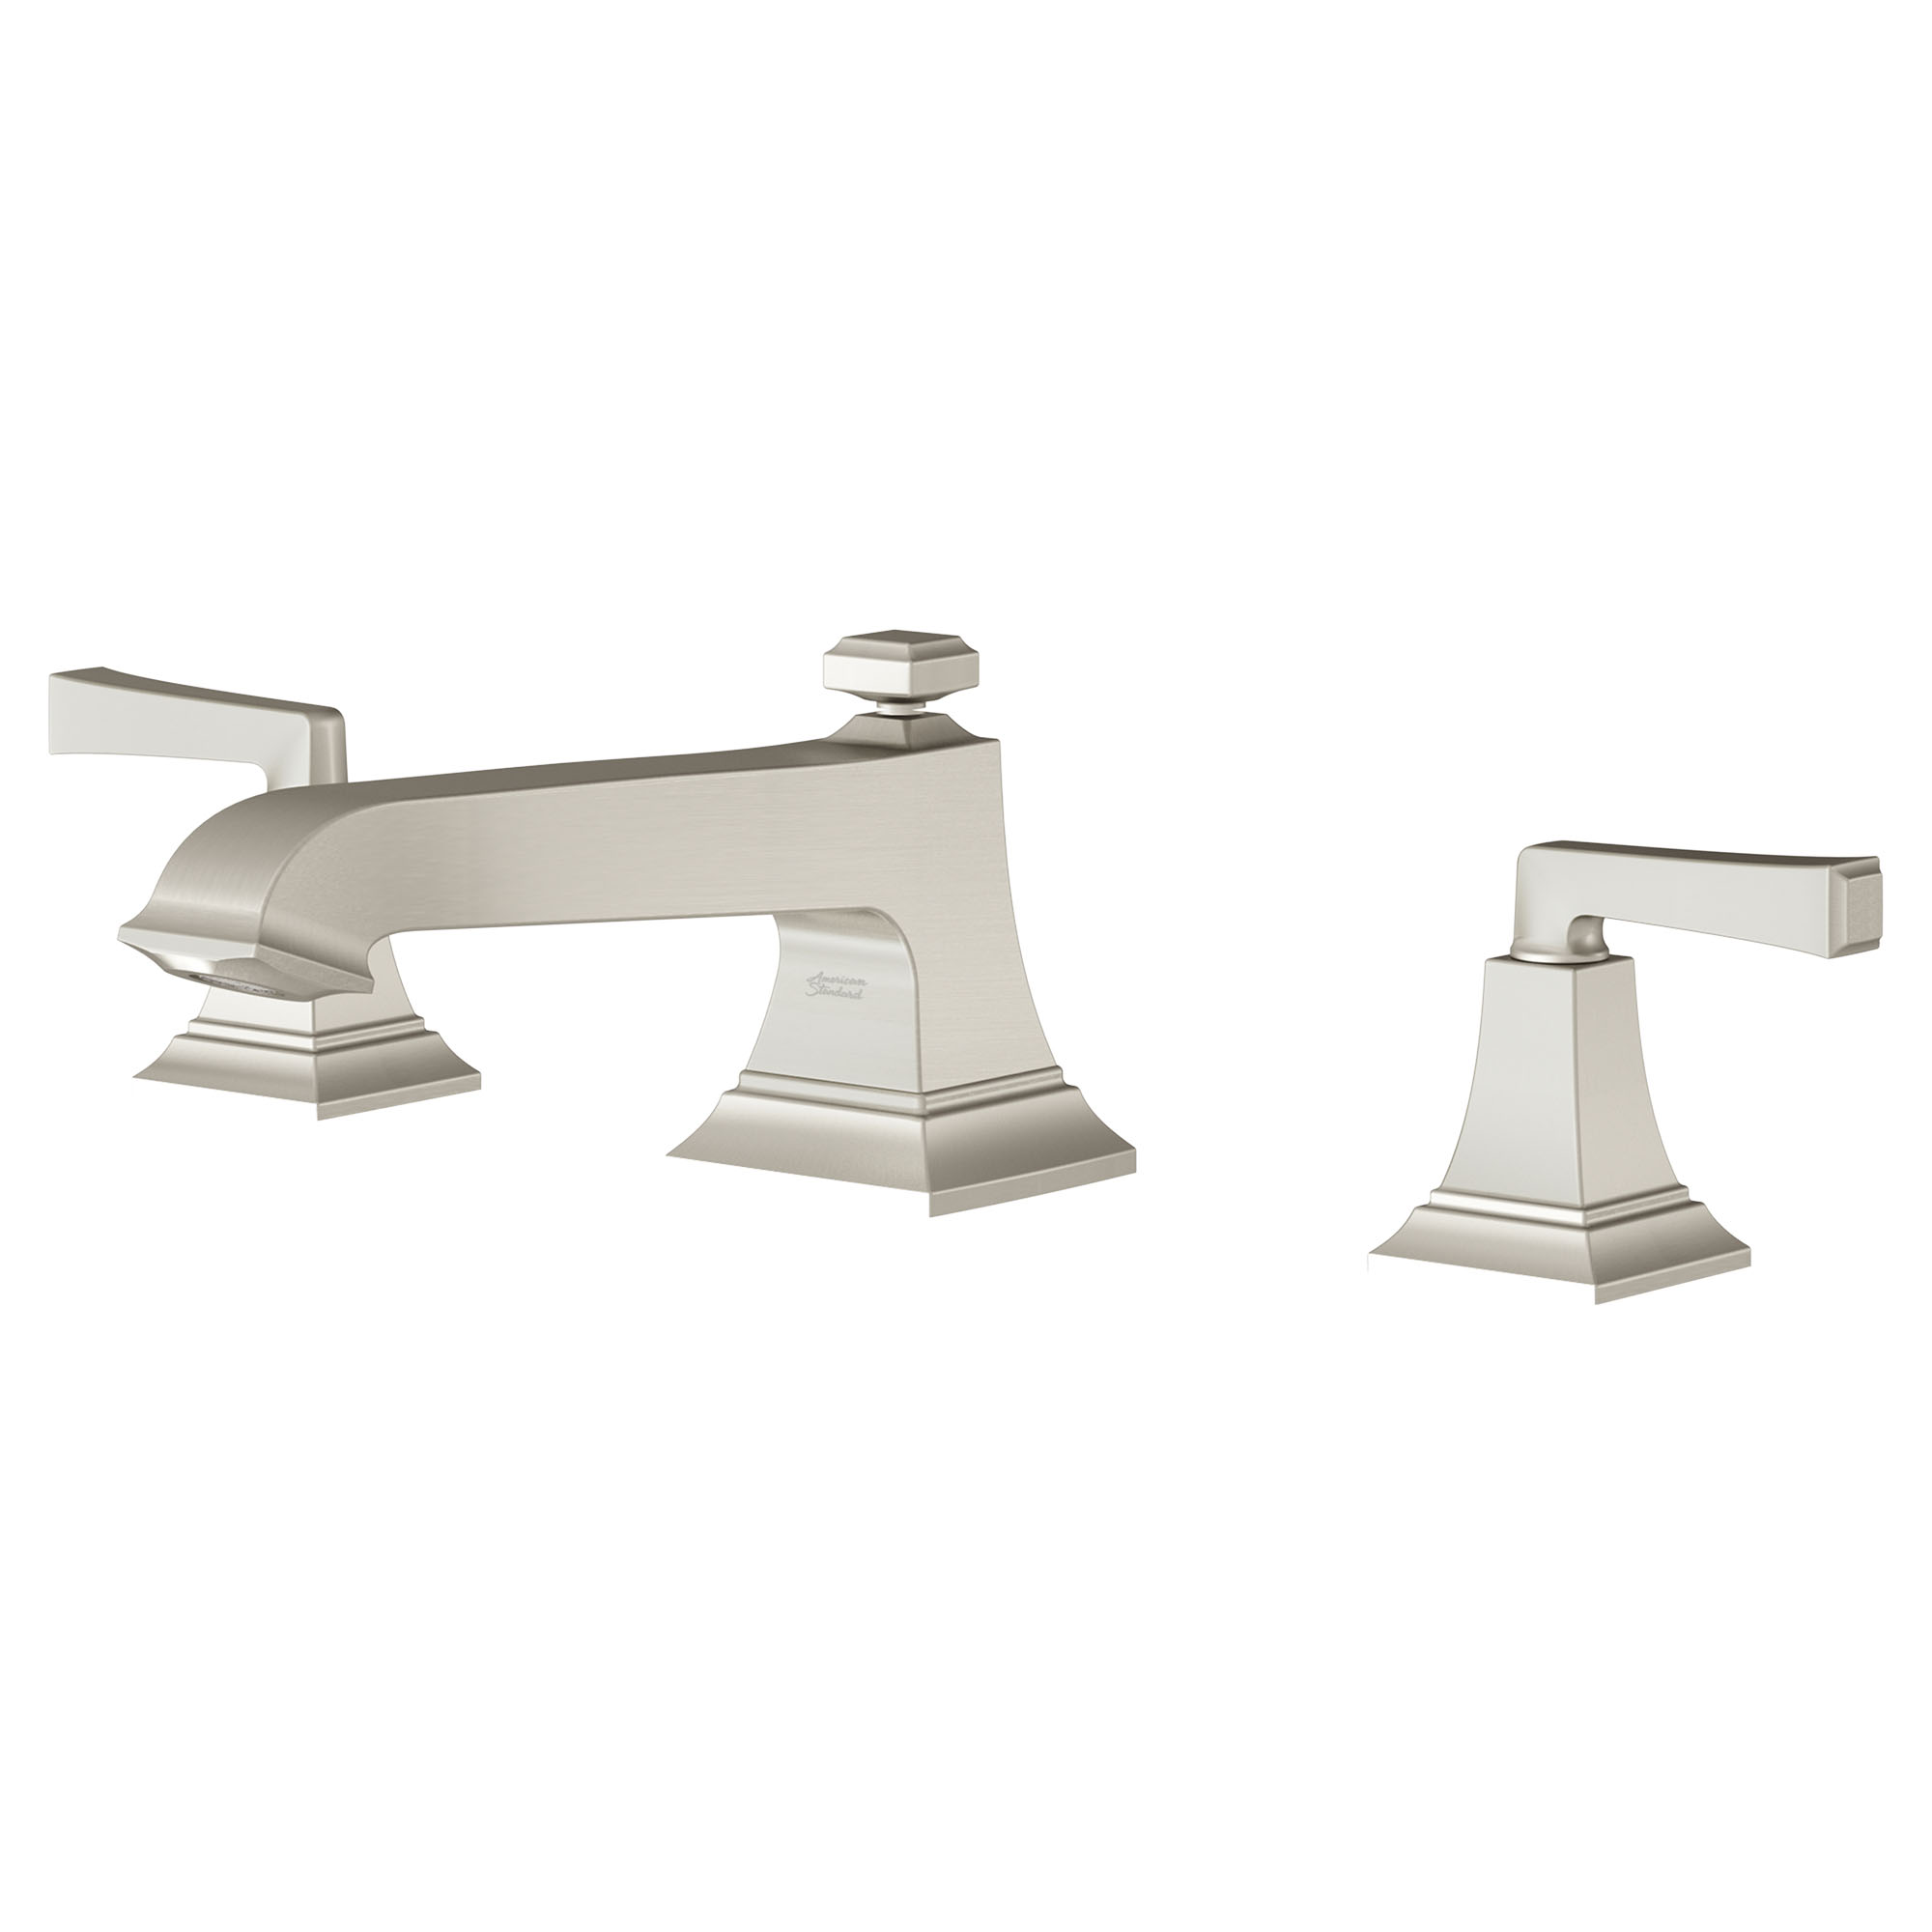 Town Square™ S Bathub Faucet With Lever Handles for Flash™ Rough-In Valve